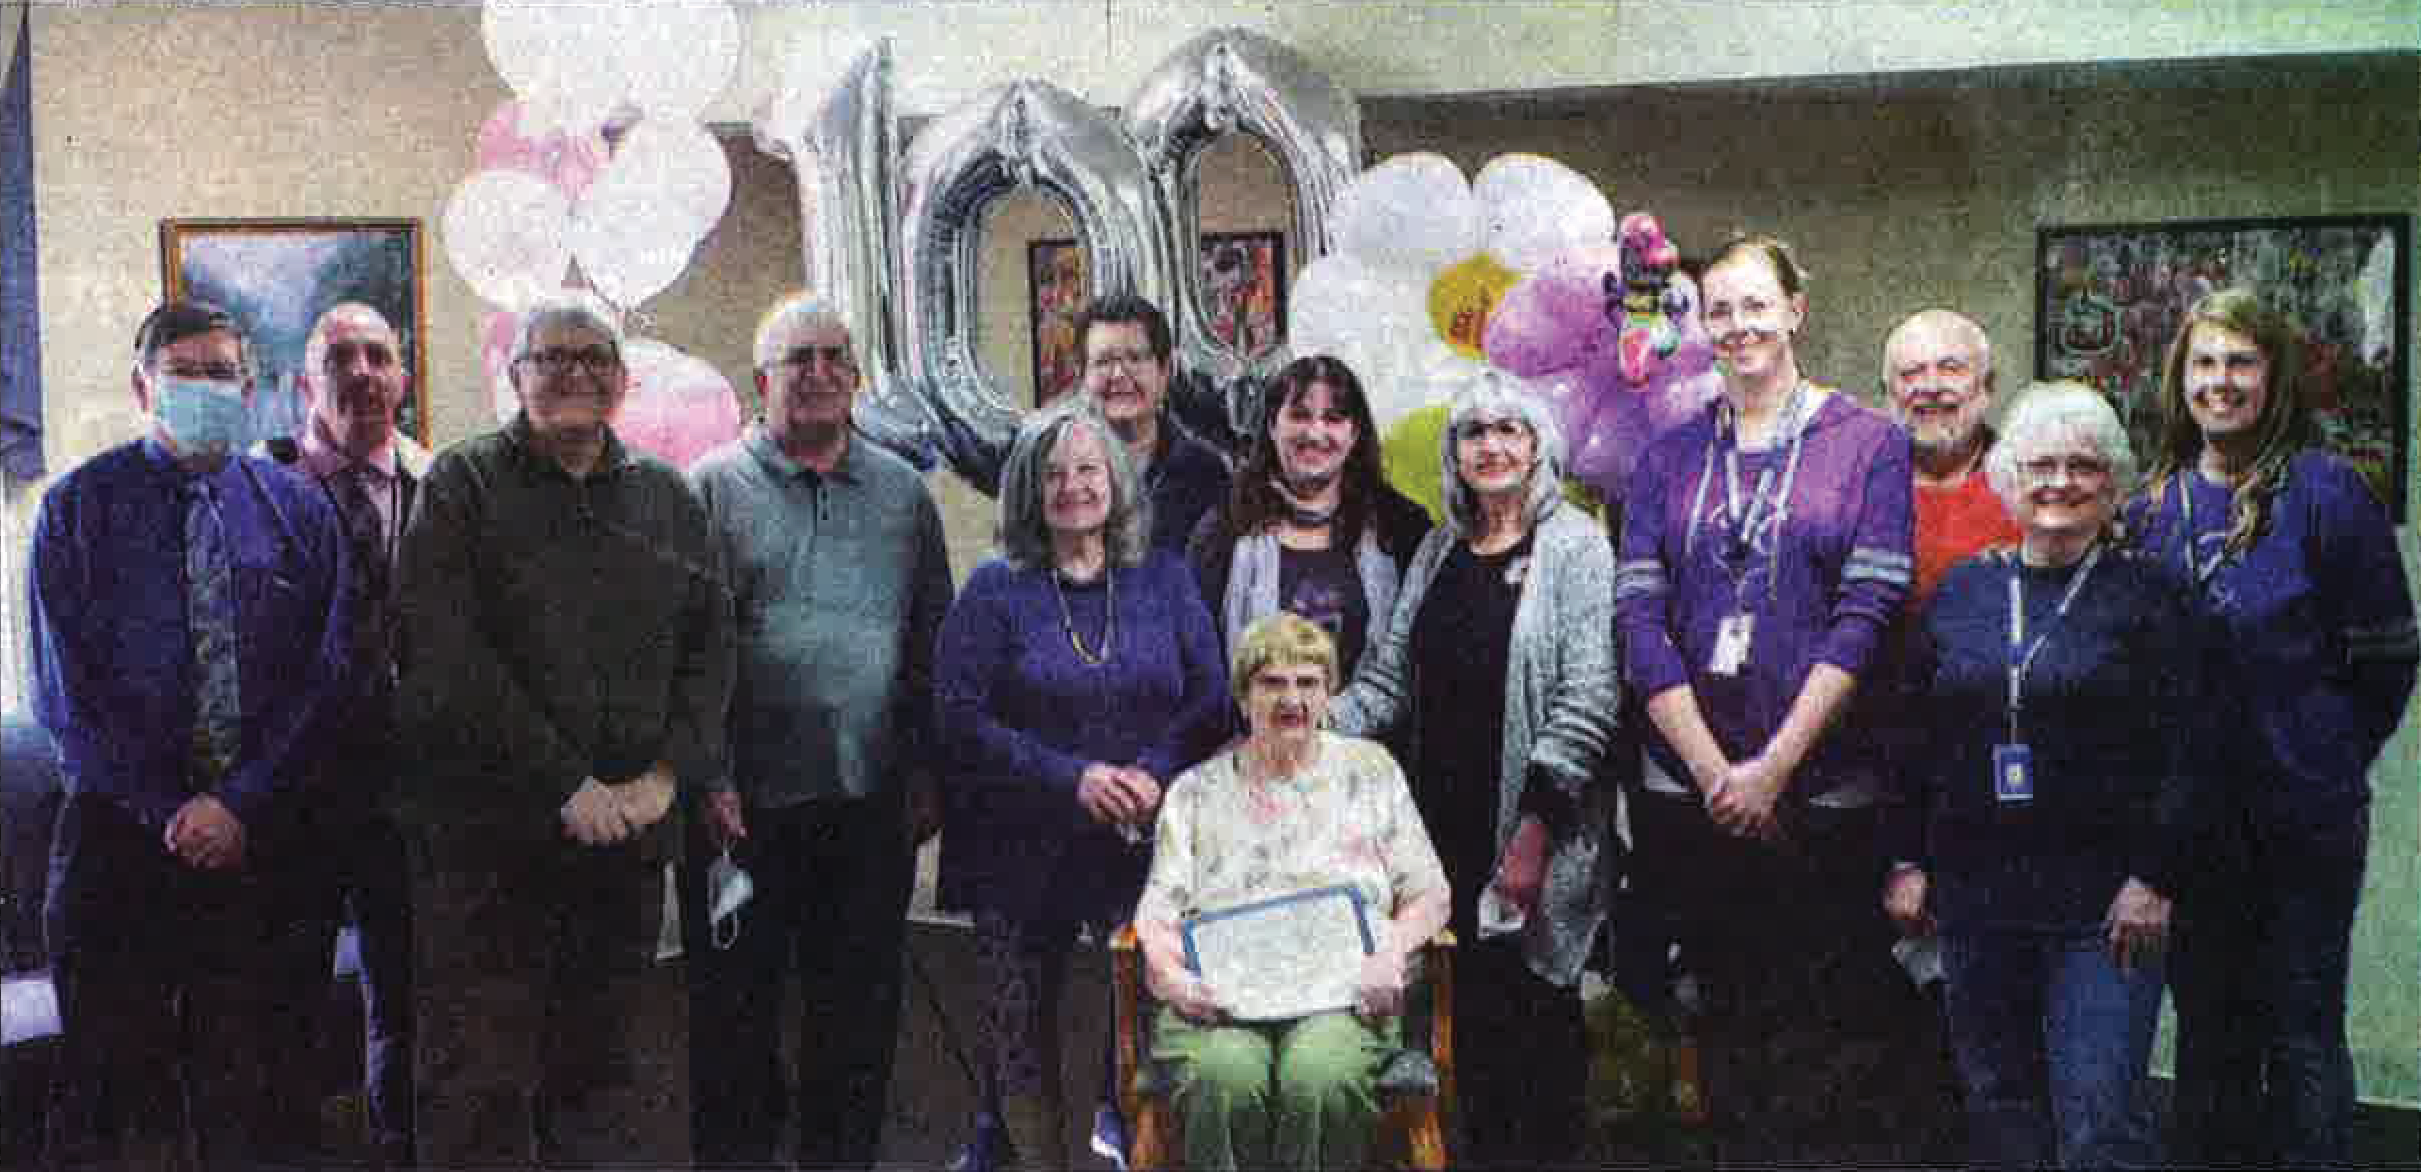 AC100thArticle - Perry County Times: Transitions Healthcare Allens Cove Resident Celebrates 100th Birthday